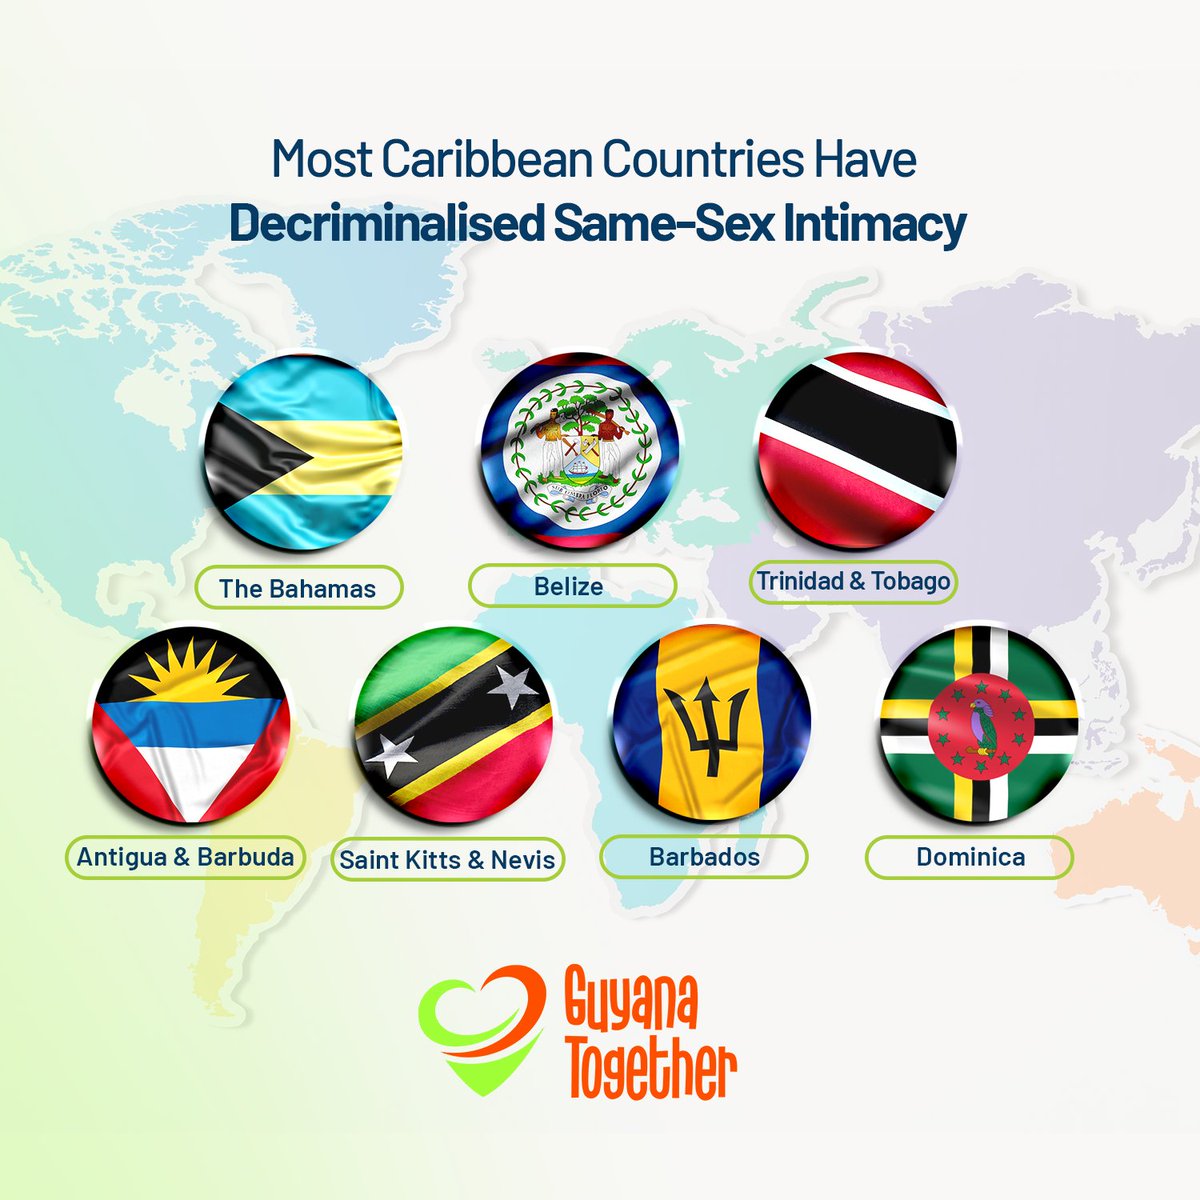 As the world observes #IDAHOBIT, we celebrate progress in the #Caribbean. Most of the countries in the region that had these laws have decriminalised same-sex intimacy. #equality #freedom #justiceforall #GuyanaTogether #IsAllAhWe #IDAHOBIT2024